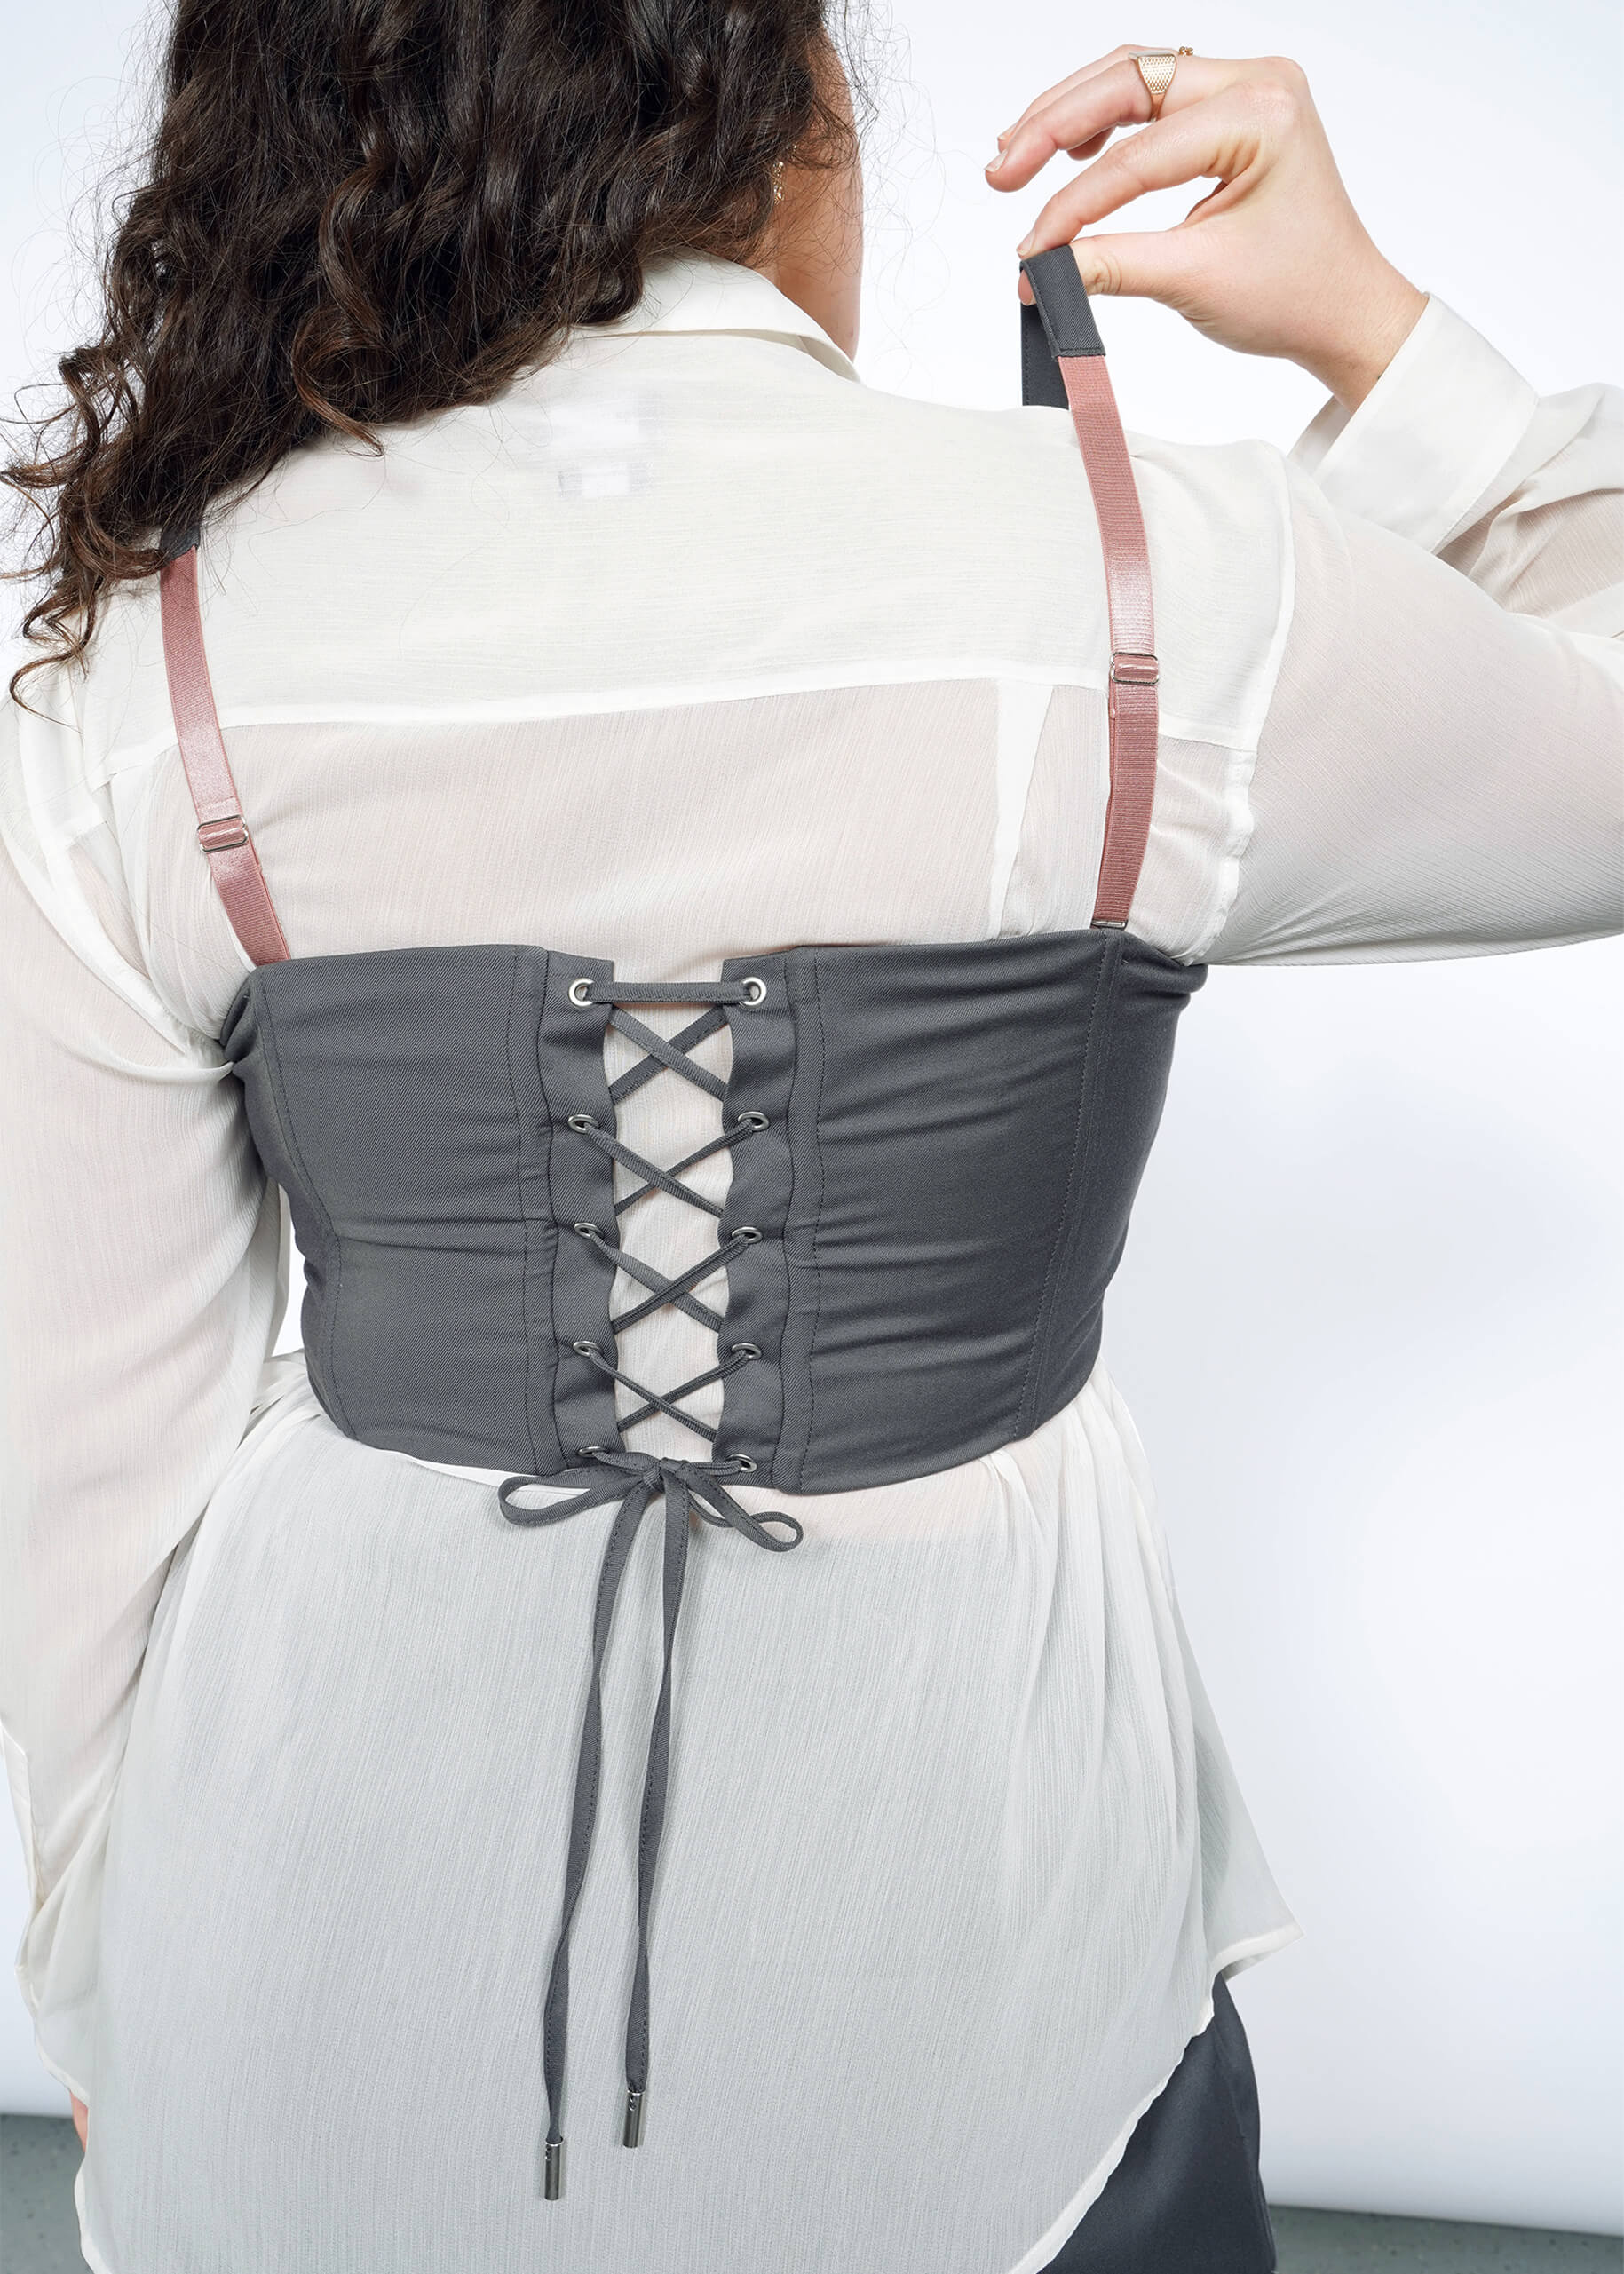 The Empower 6-Way Corset in Charcoal